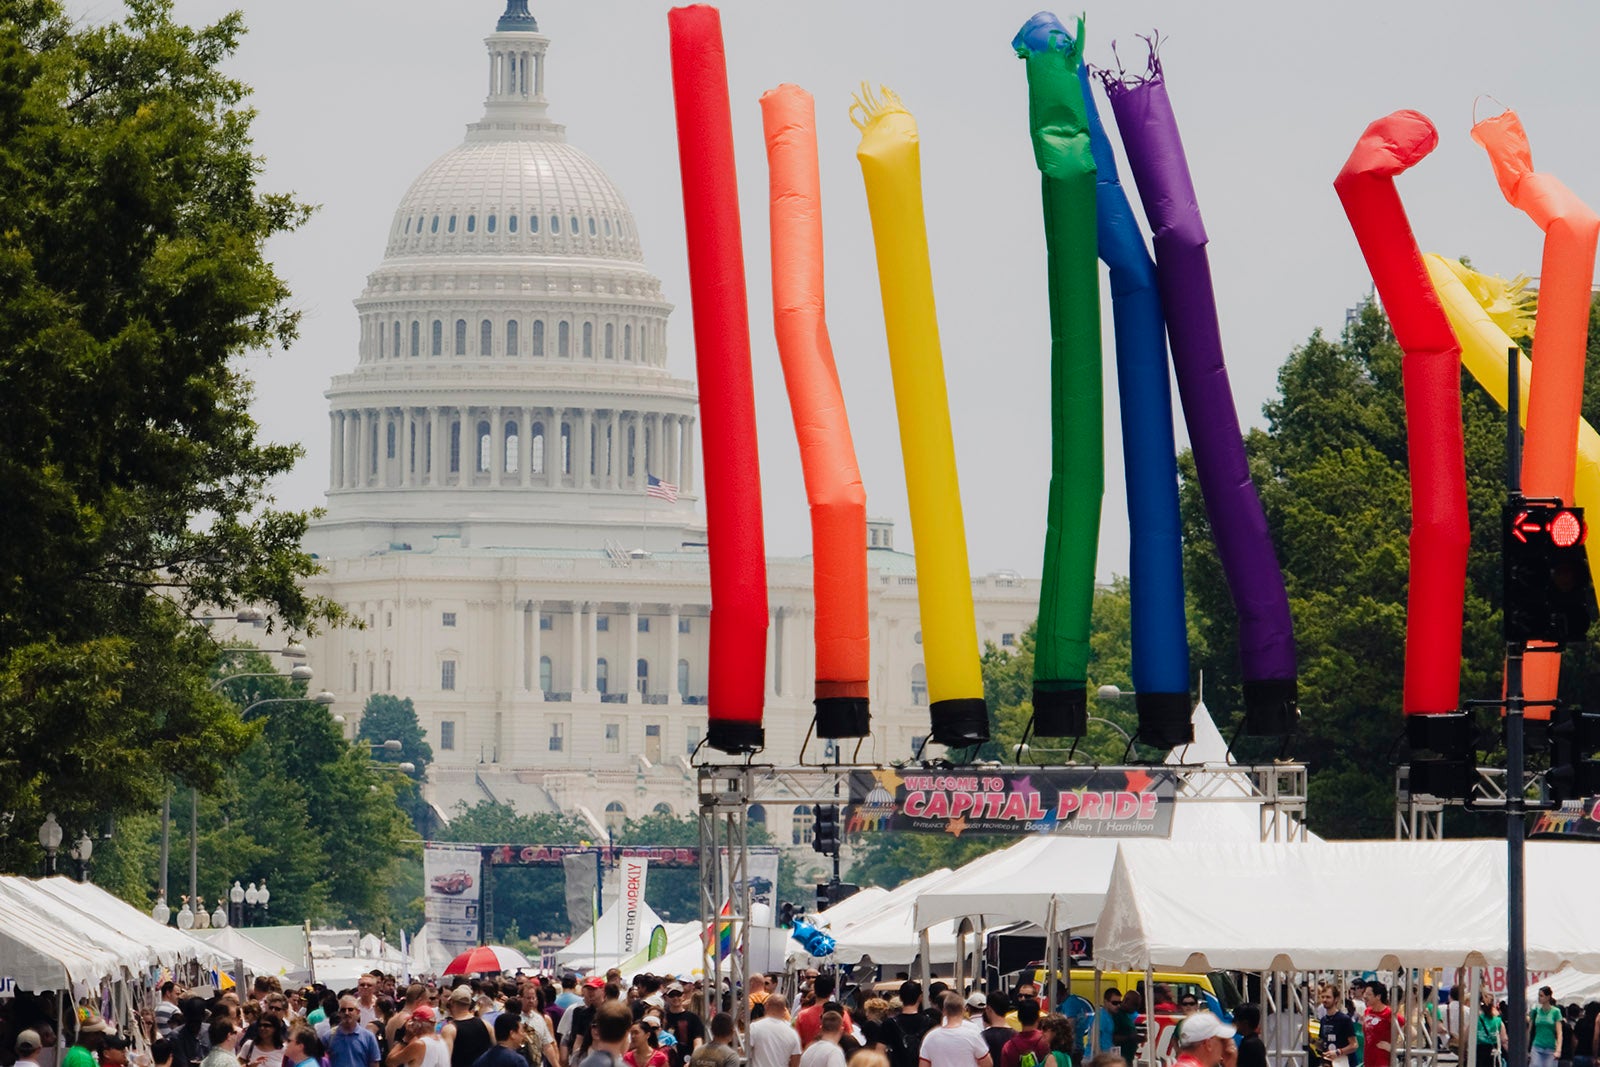 Pride festival in front of DC Capital building